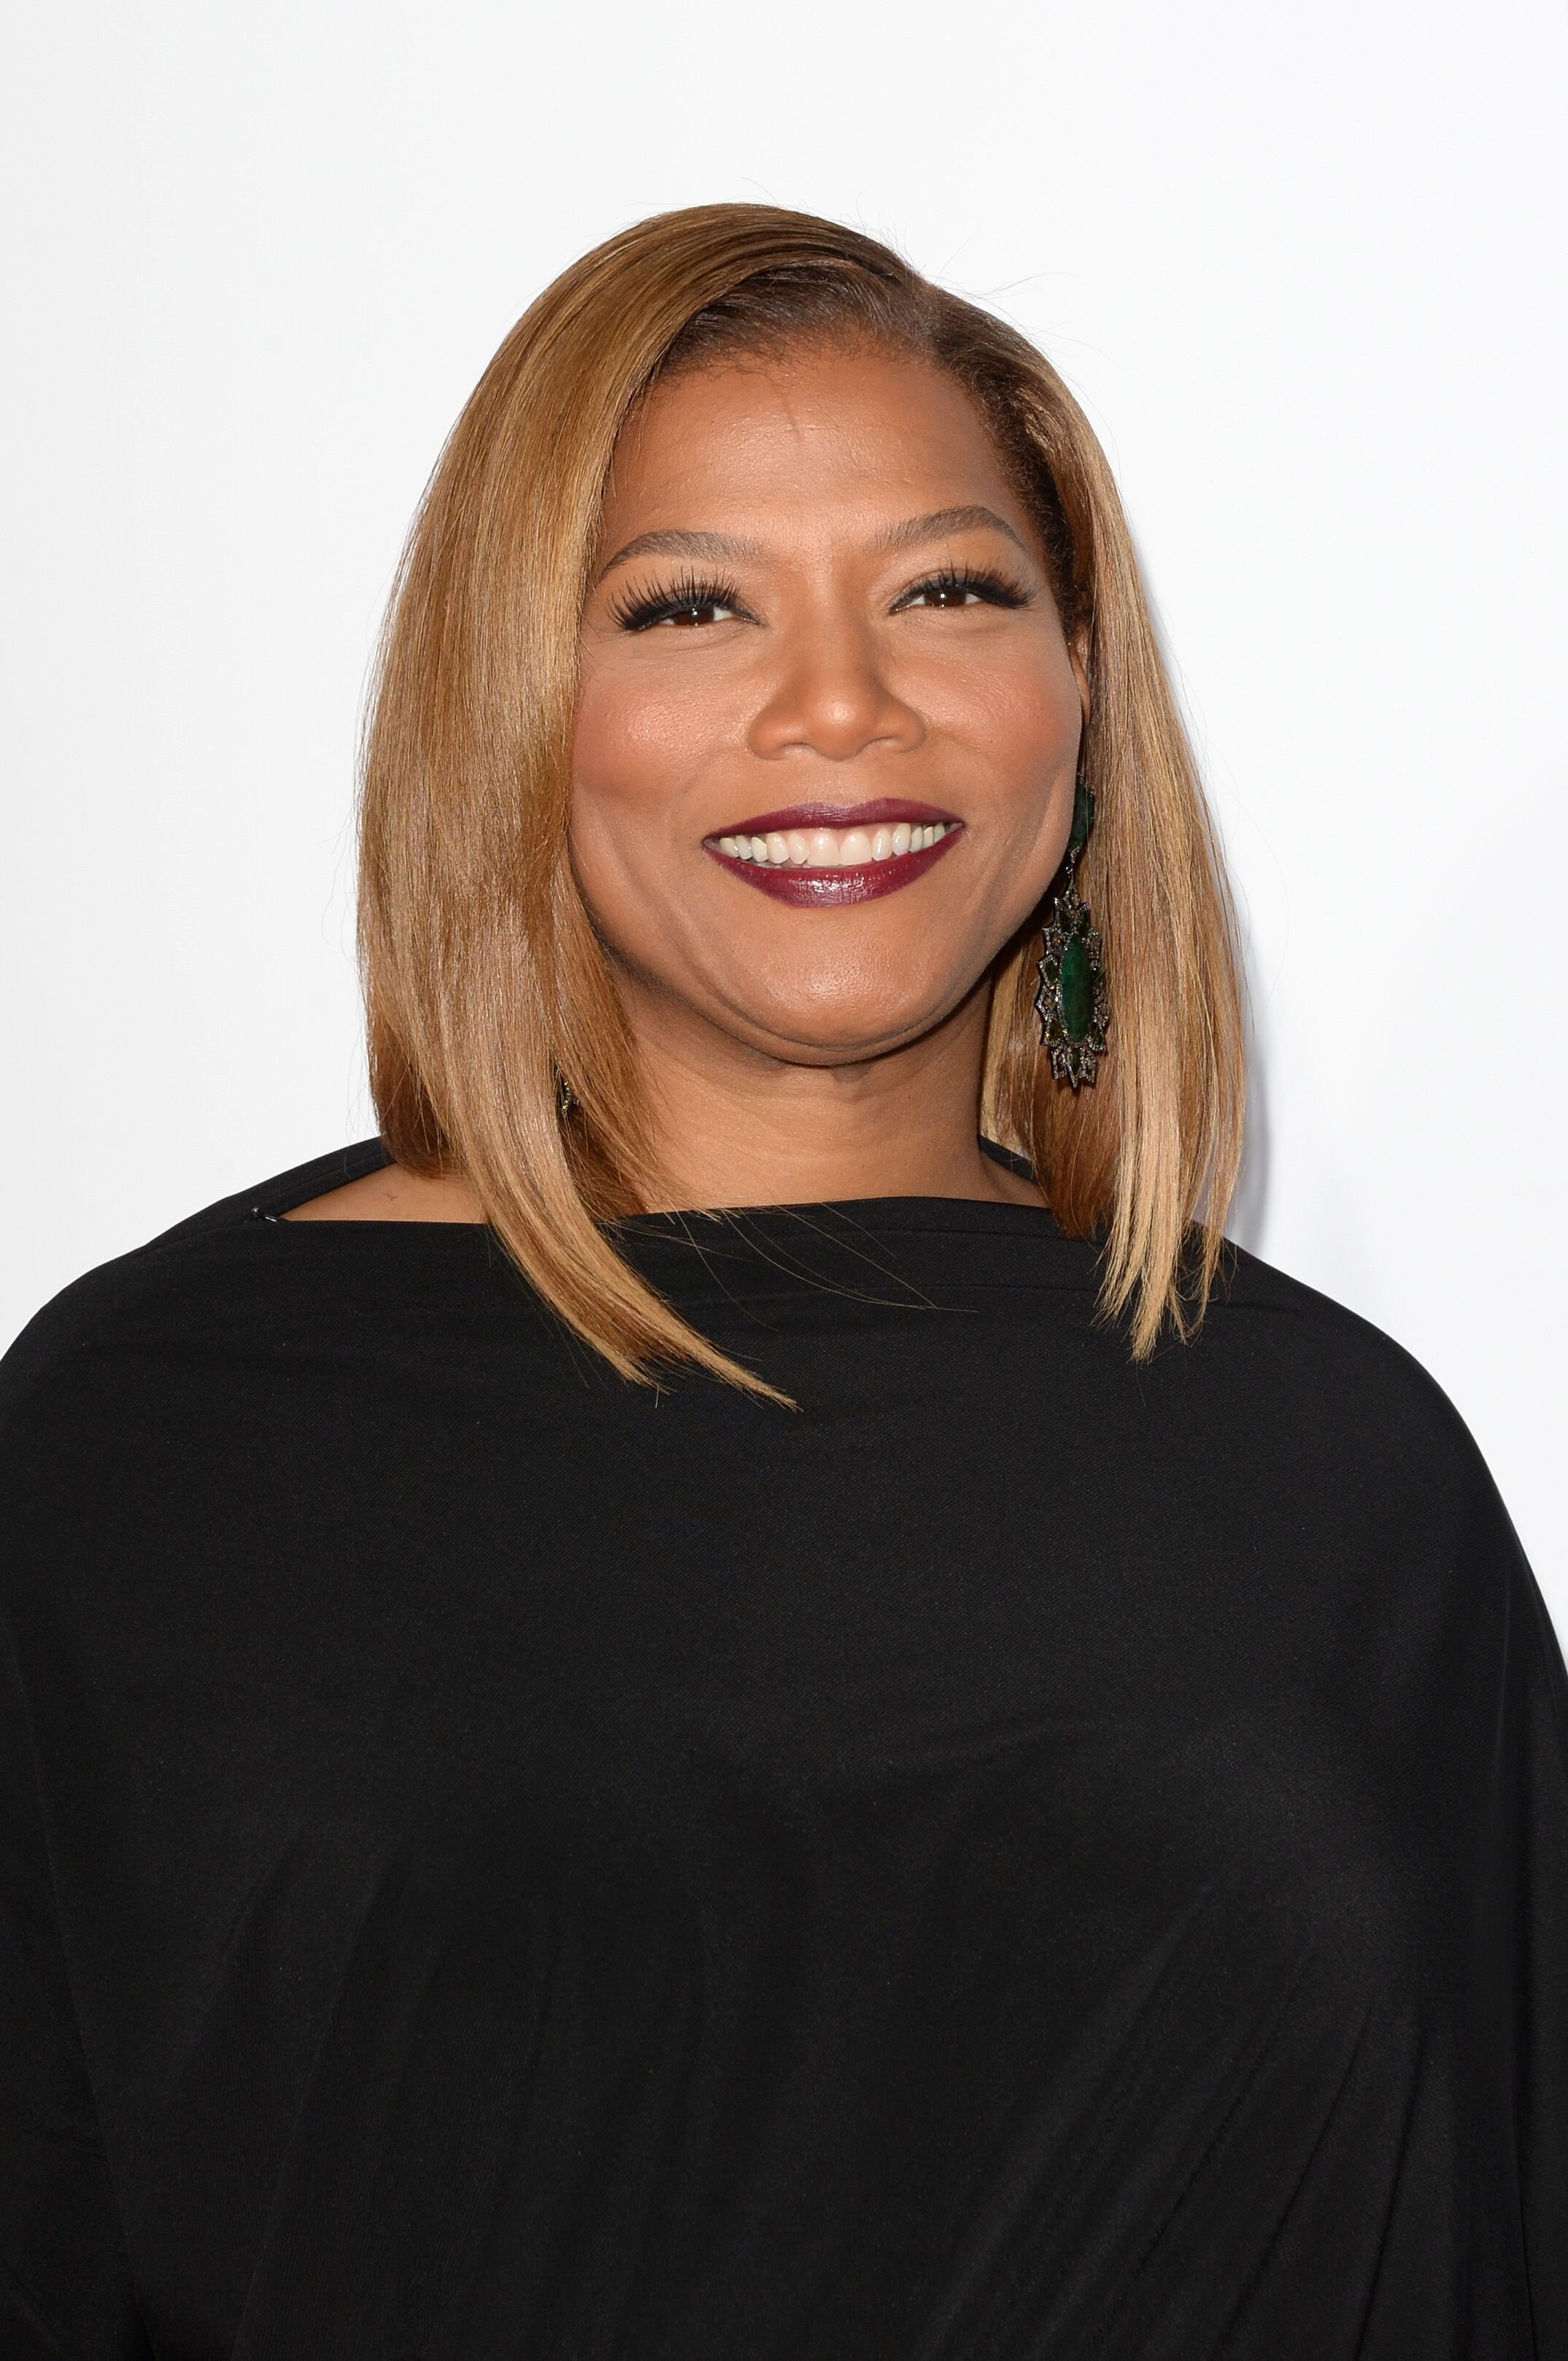 Actress Queen Latifah attends The 40th Annual People's Choice Awards at Nokia Theatre L.A. Live on January 8, 2014 | Photo: Getty Images